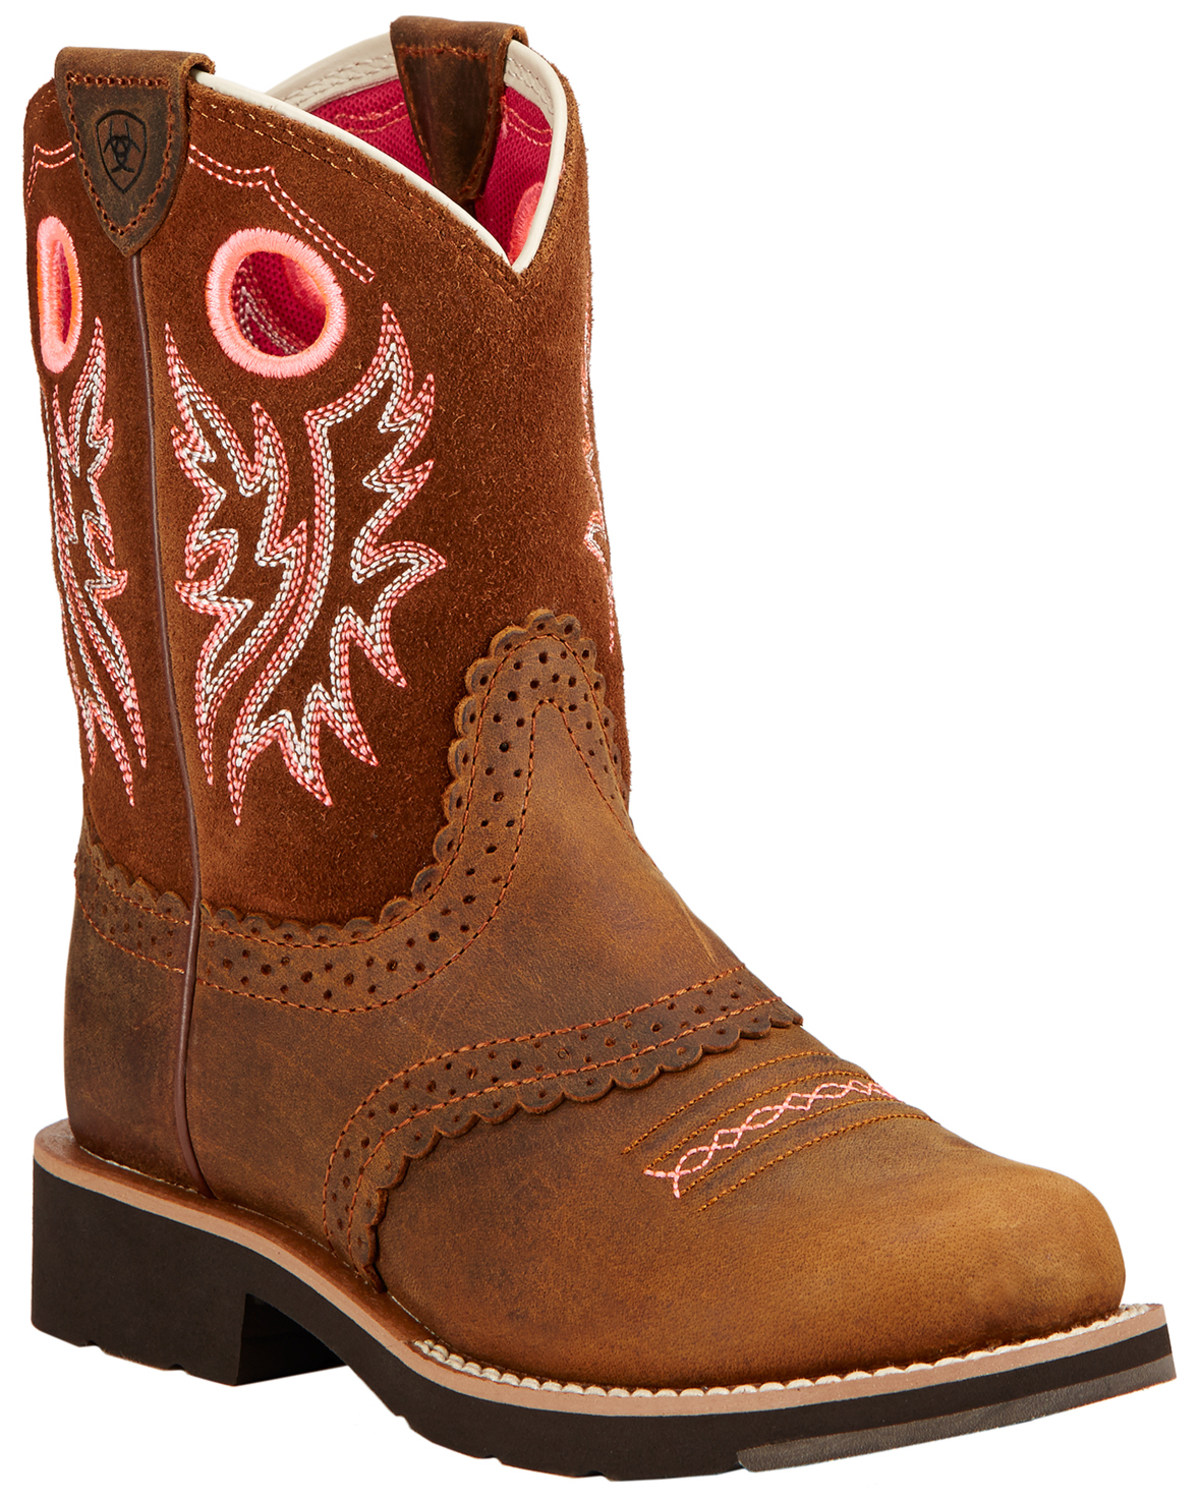 Ariat Little Girls' Fatbaby Western Boots - Round Toe